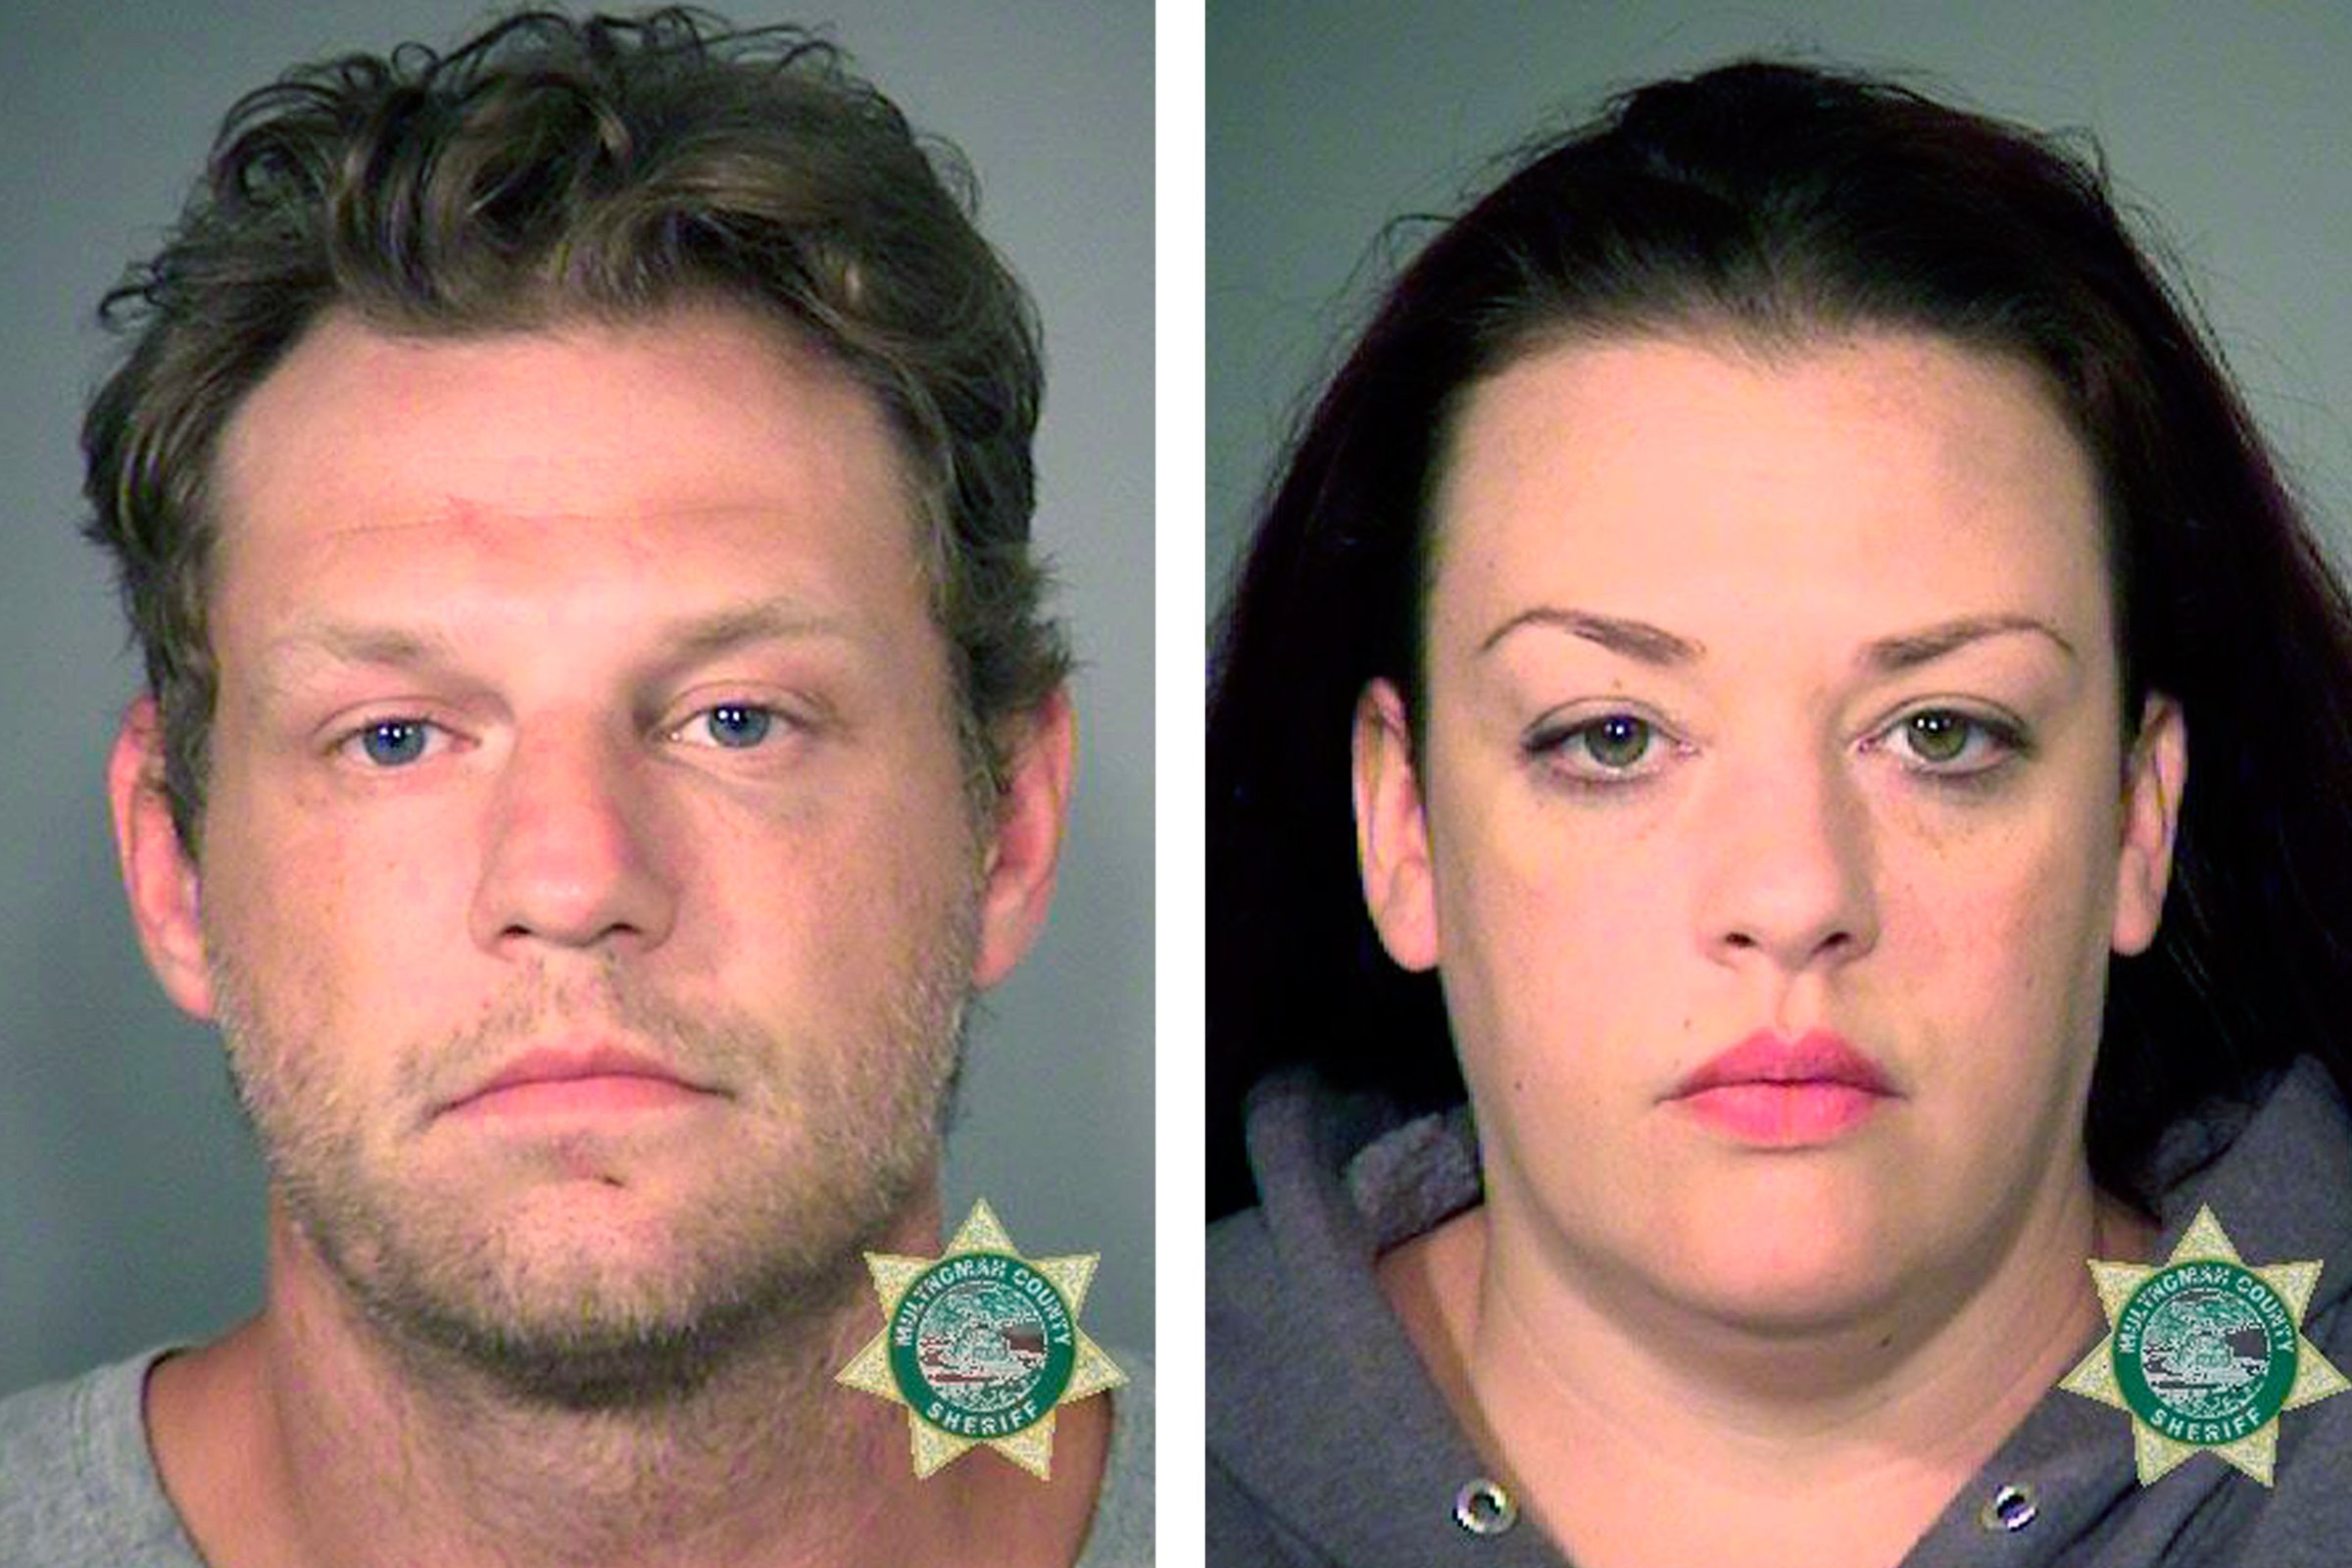 Russell Courtier (left) and Colleen Hunt in undated photos provided by the Multnomah County Sheriff's office.